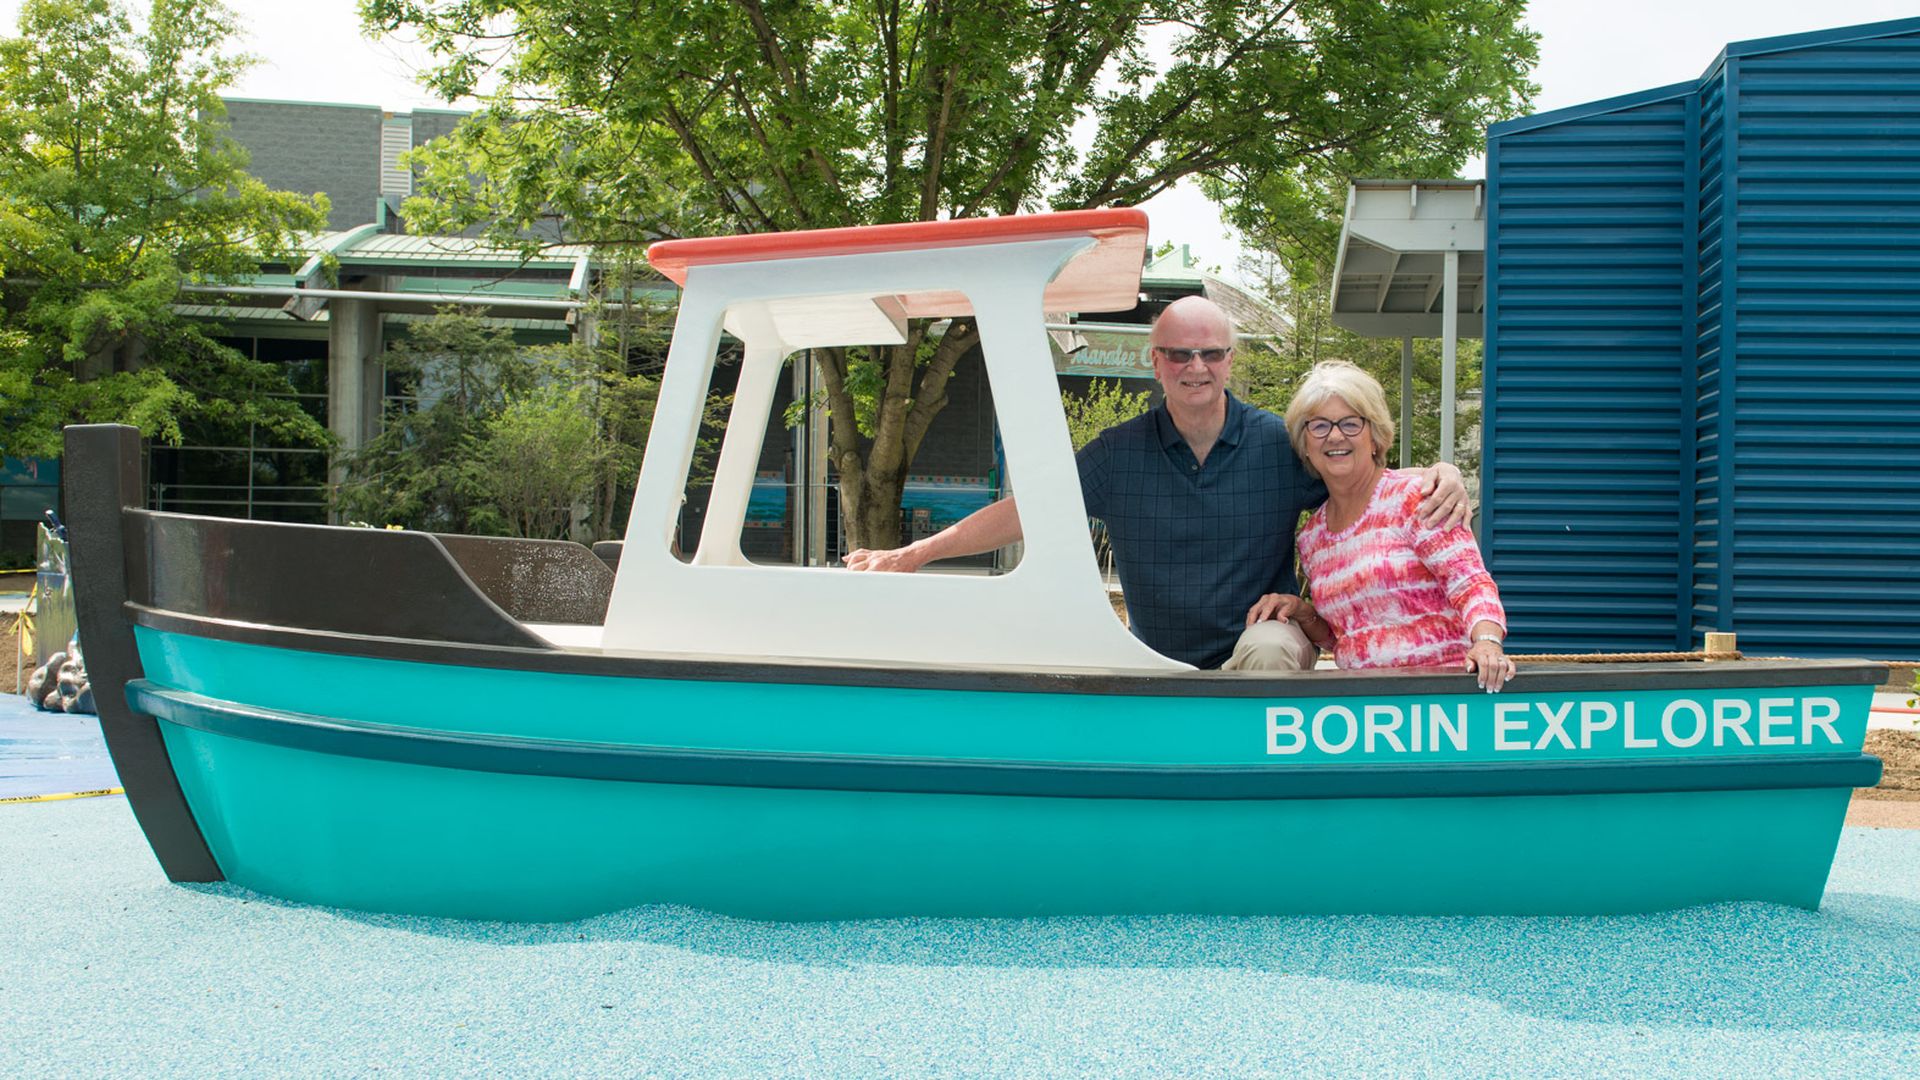 Columbus Zoo director emeritus Jerry Borin and his wife Lois, sit in a tugboat in a zoo play area named after him